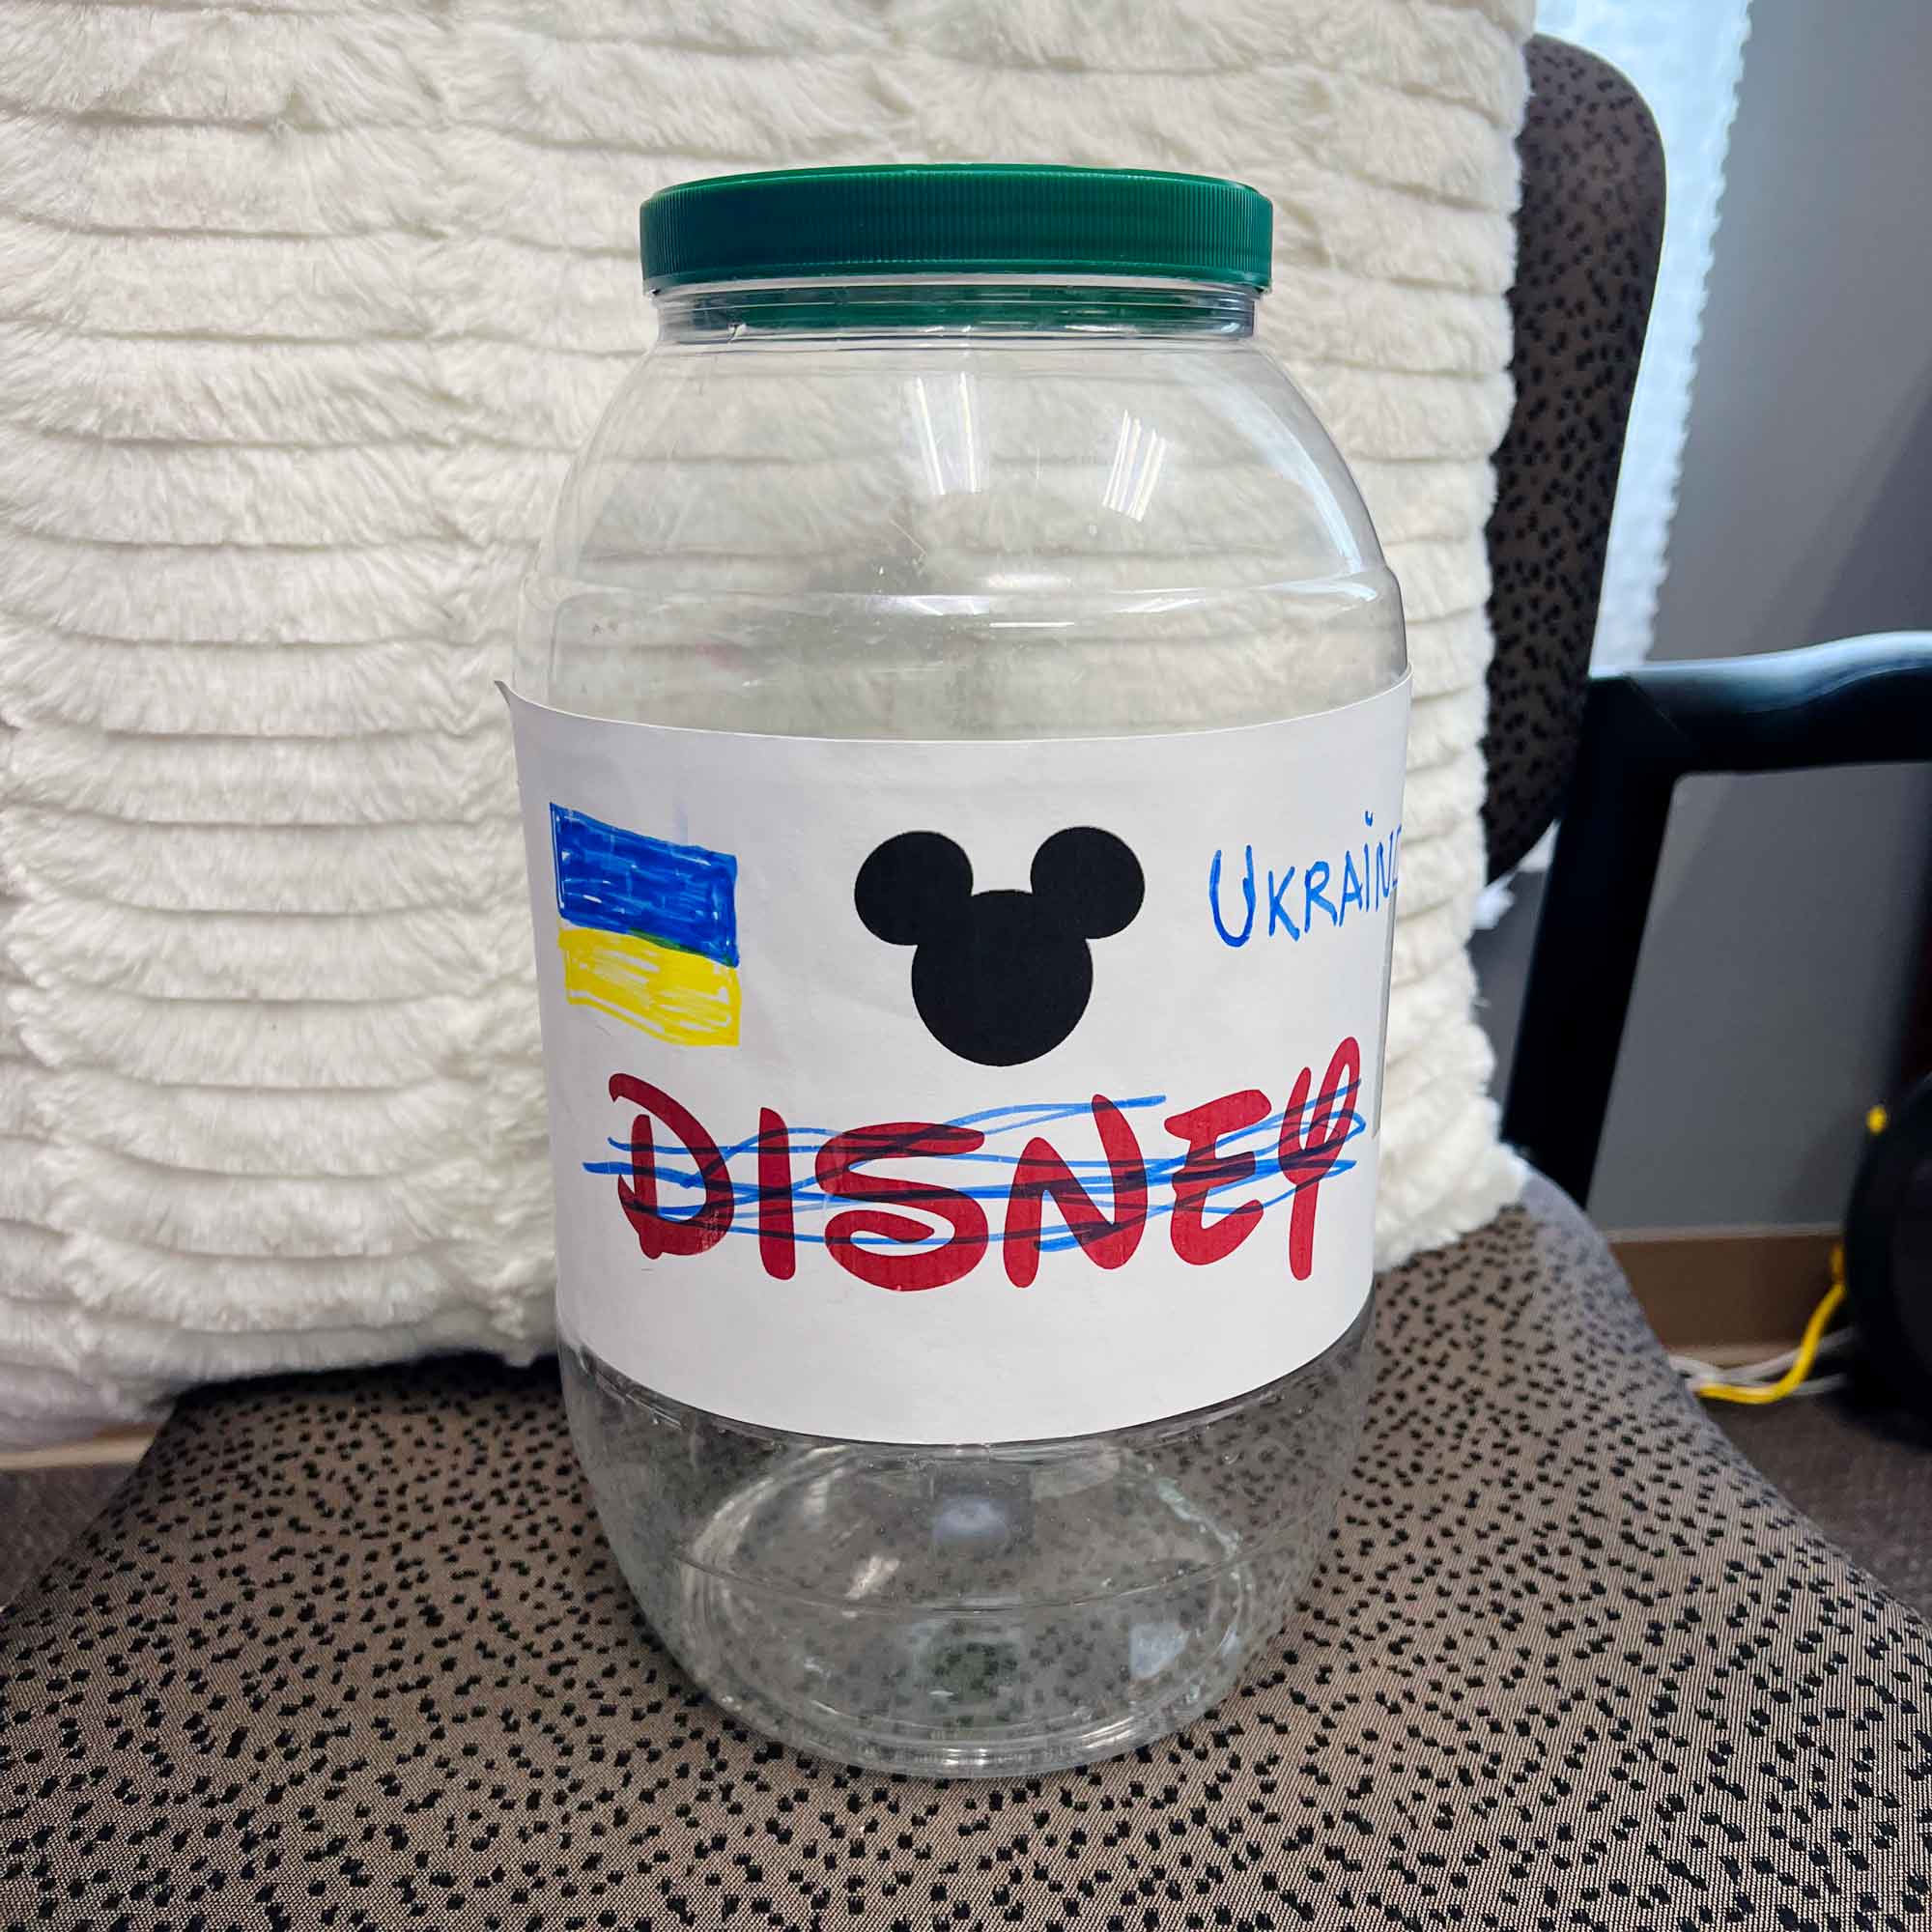 Nicholas chose to give to Ukraine instead of going to Disney.